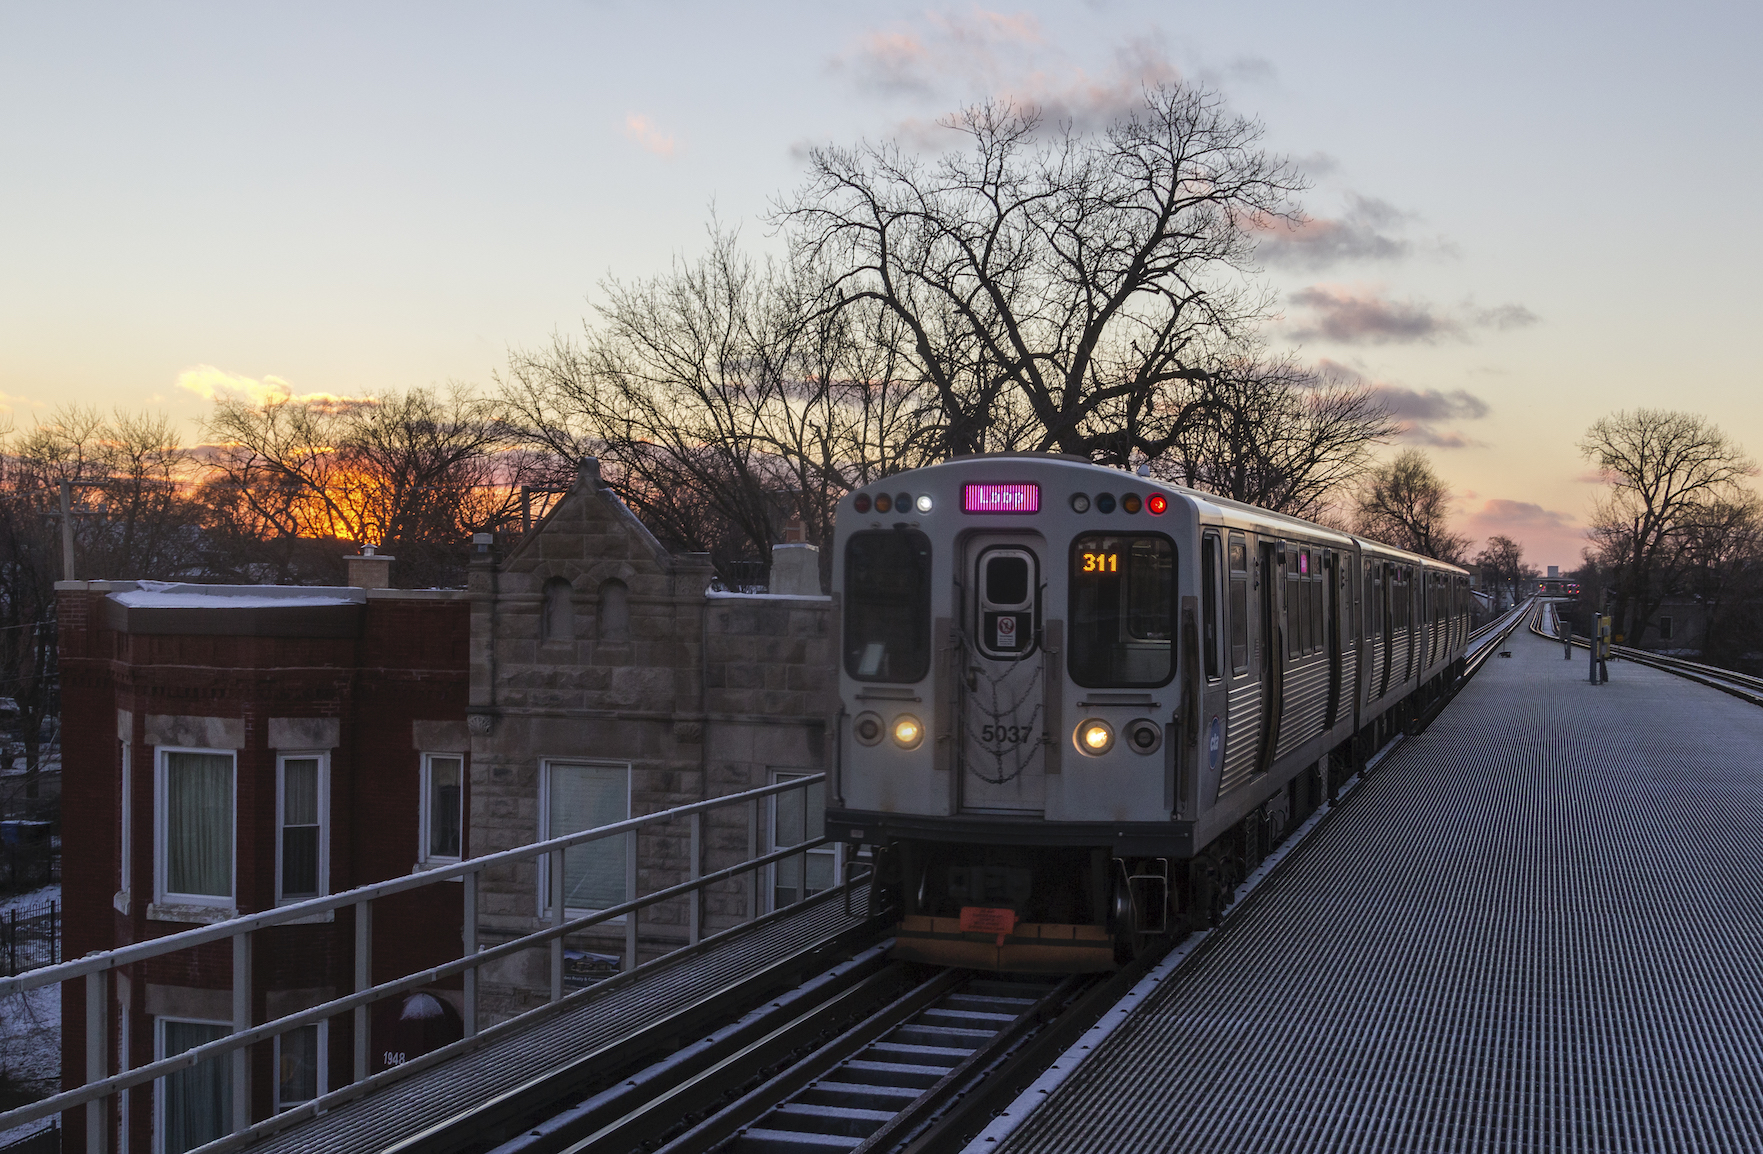 Loop-bound Pink Line pulling into the Kedzie station in Chicago's North Lawndale neighborhood.